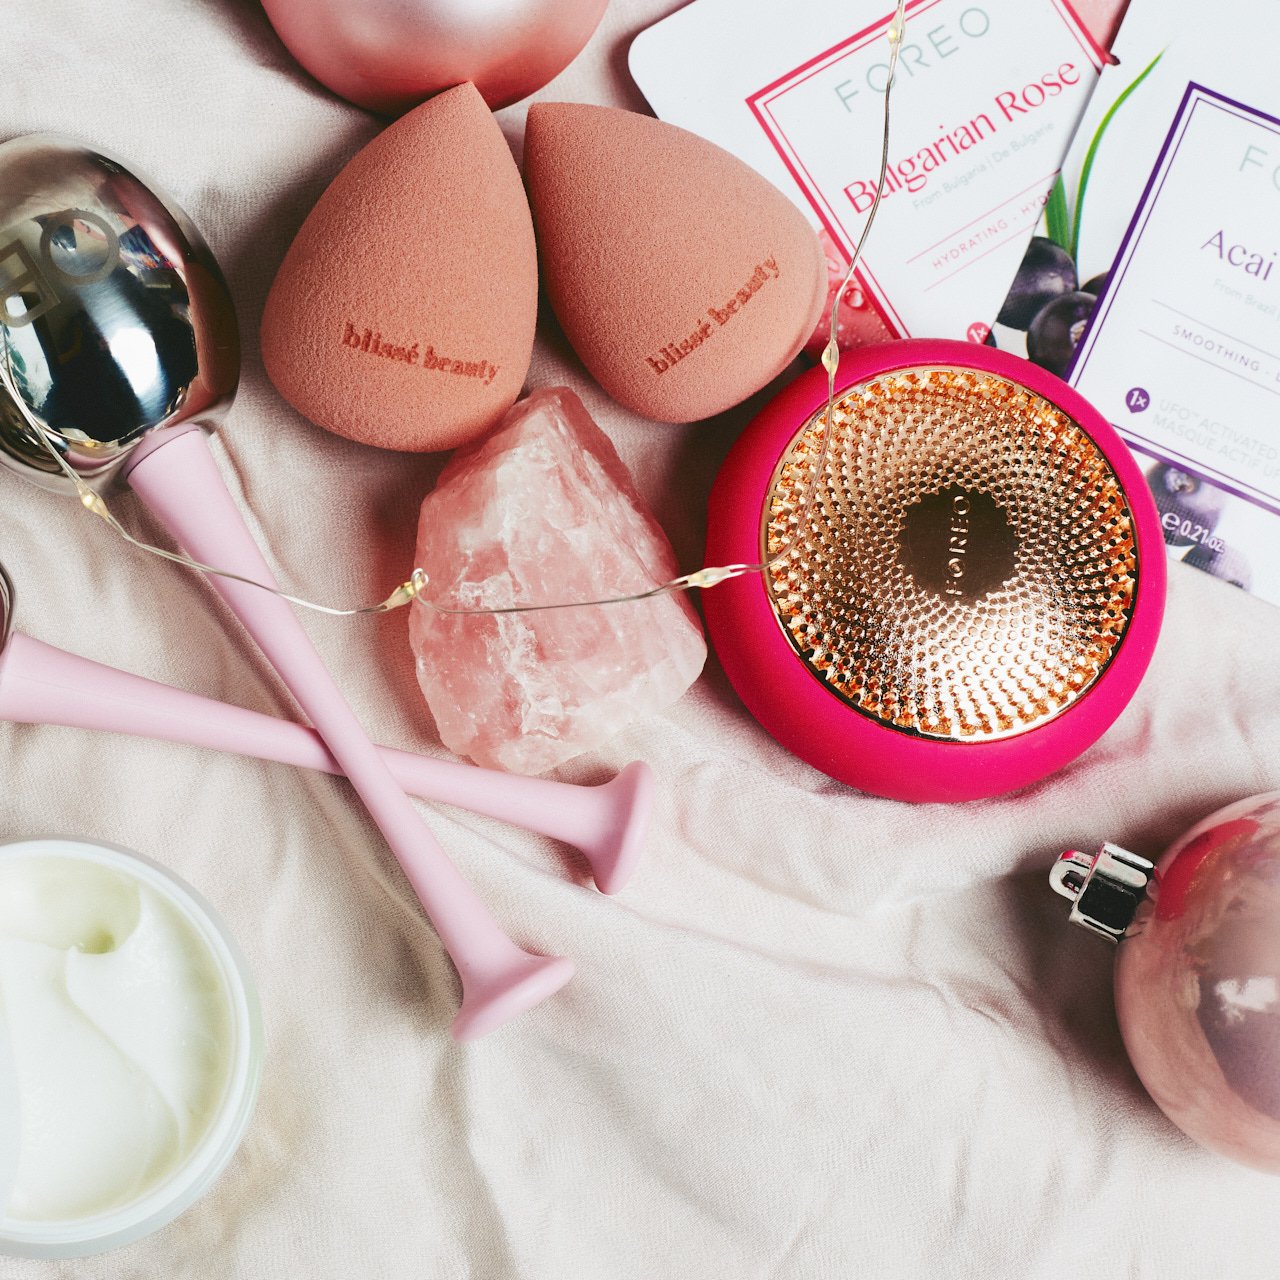  FOREO UFO &amp; Masks part of the  Glow Every Day set  £199  BLISSE BEAUTY  Blender  £10  OXYGEN BOUTIQUE  Cryo Facial Tools  £55&nbsp;  ODILE PARIS  The Age Defying Cream  £140       